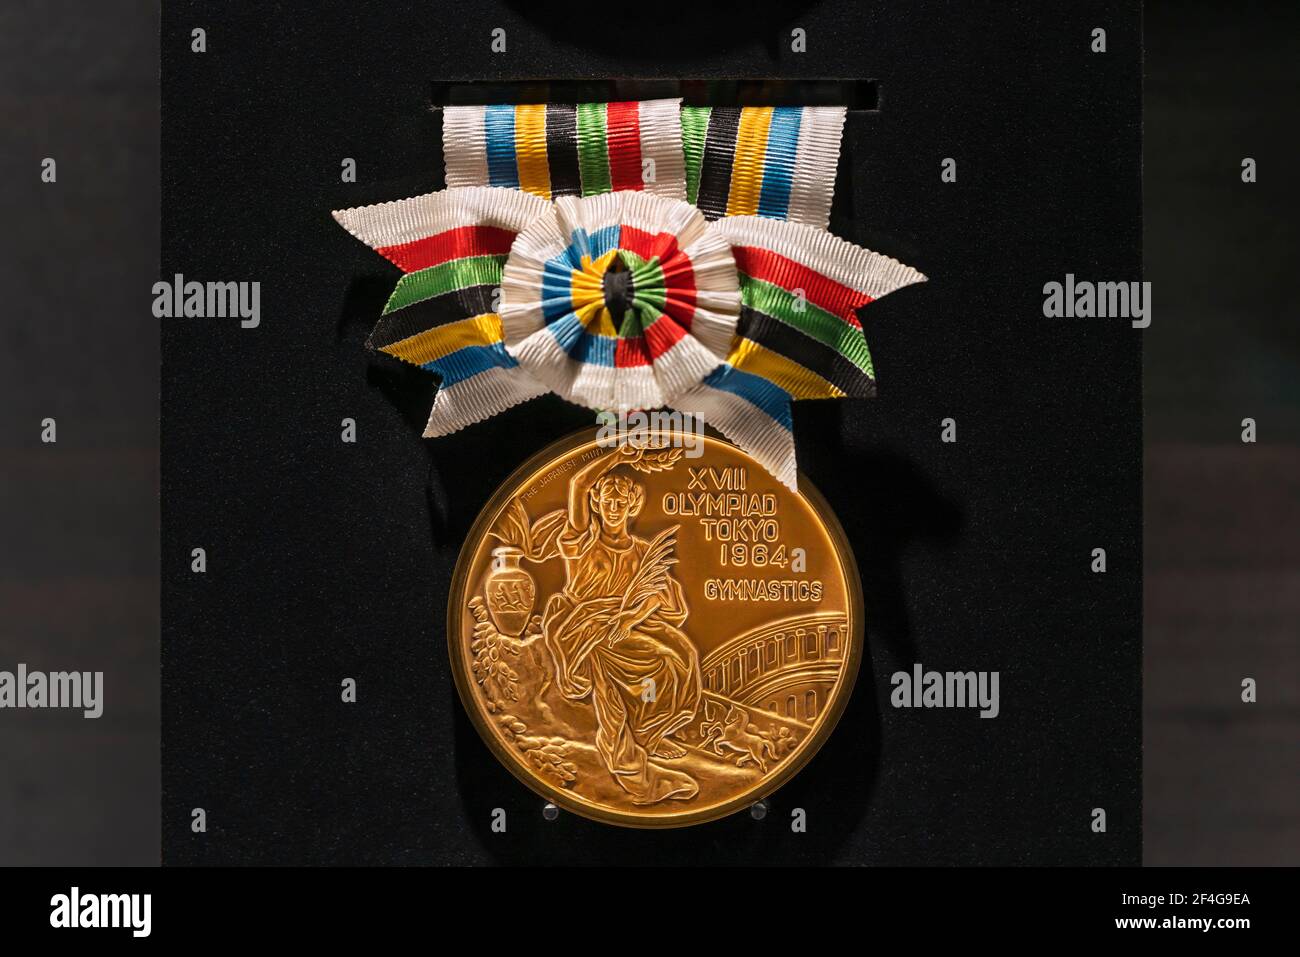 tokyo, japan - march 2 2021: Close up on the official gymnastics gold medal used during the 1964 Summer Olympics of Tokyo exhibited in the Japan Olymp Stock Photo